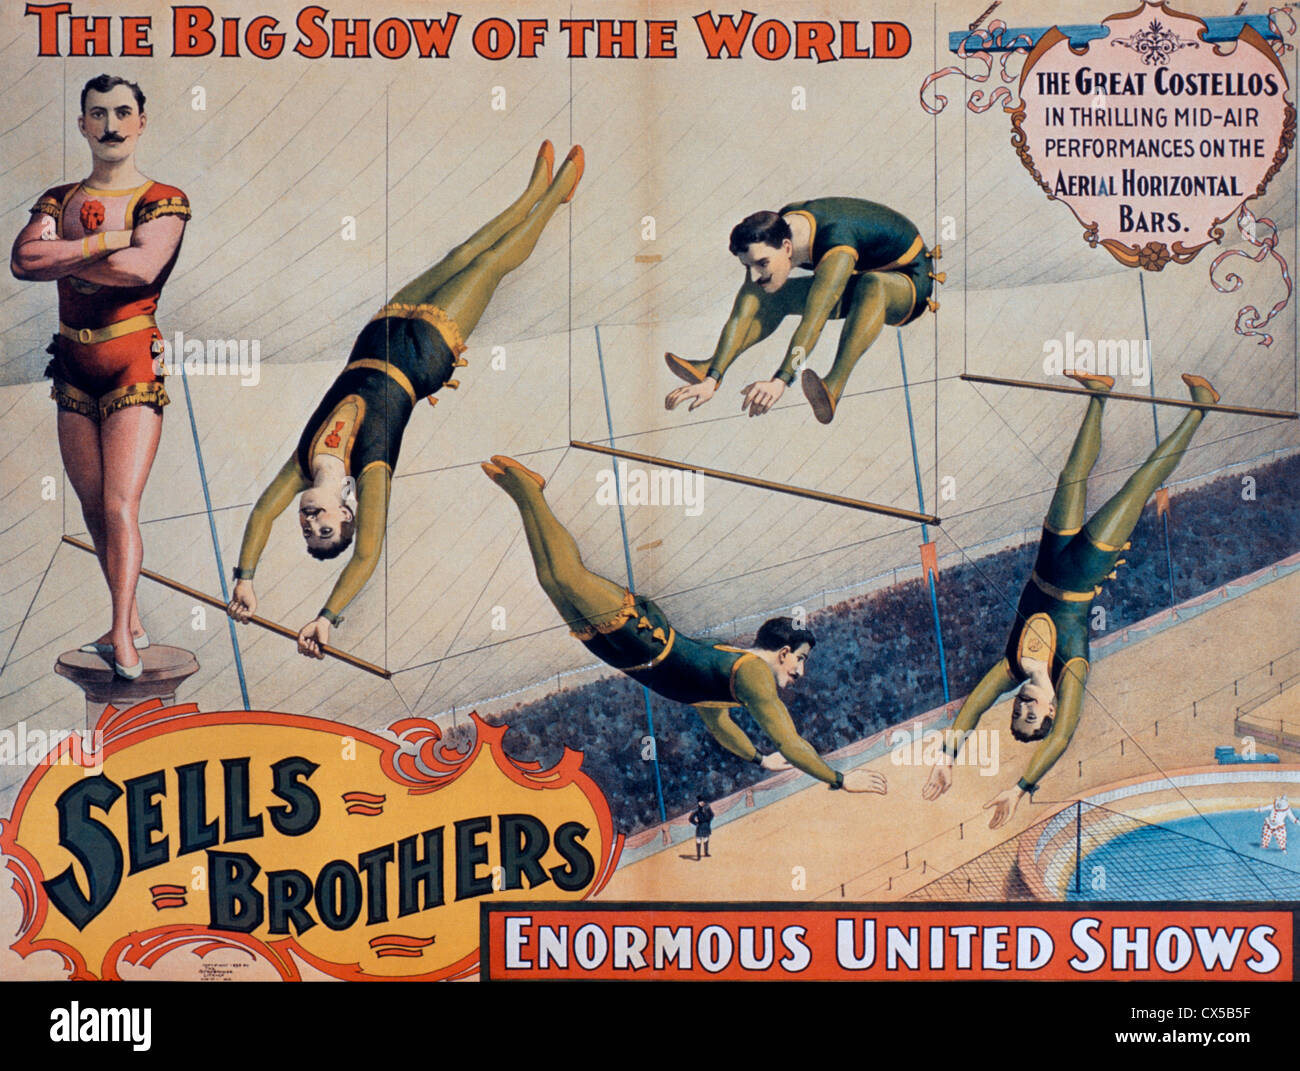 Sells Brothers Enormous United Shows Poster, The Great Costellos in Thrilling Mid-Air Performances on the Aerial Horizontal Bars Stock Photo